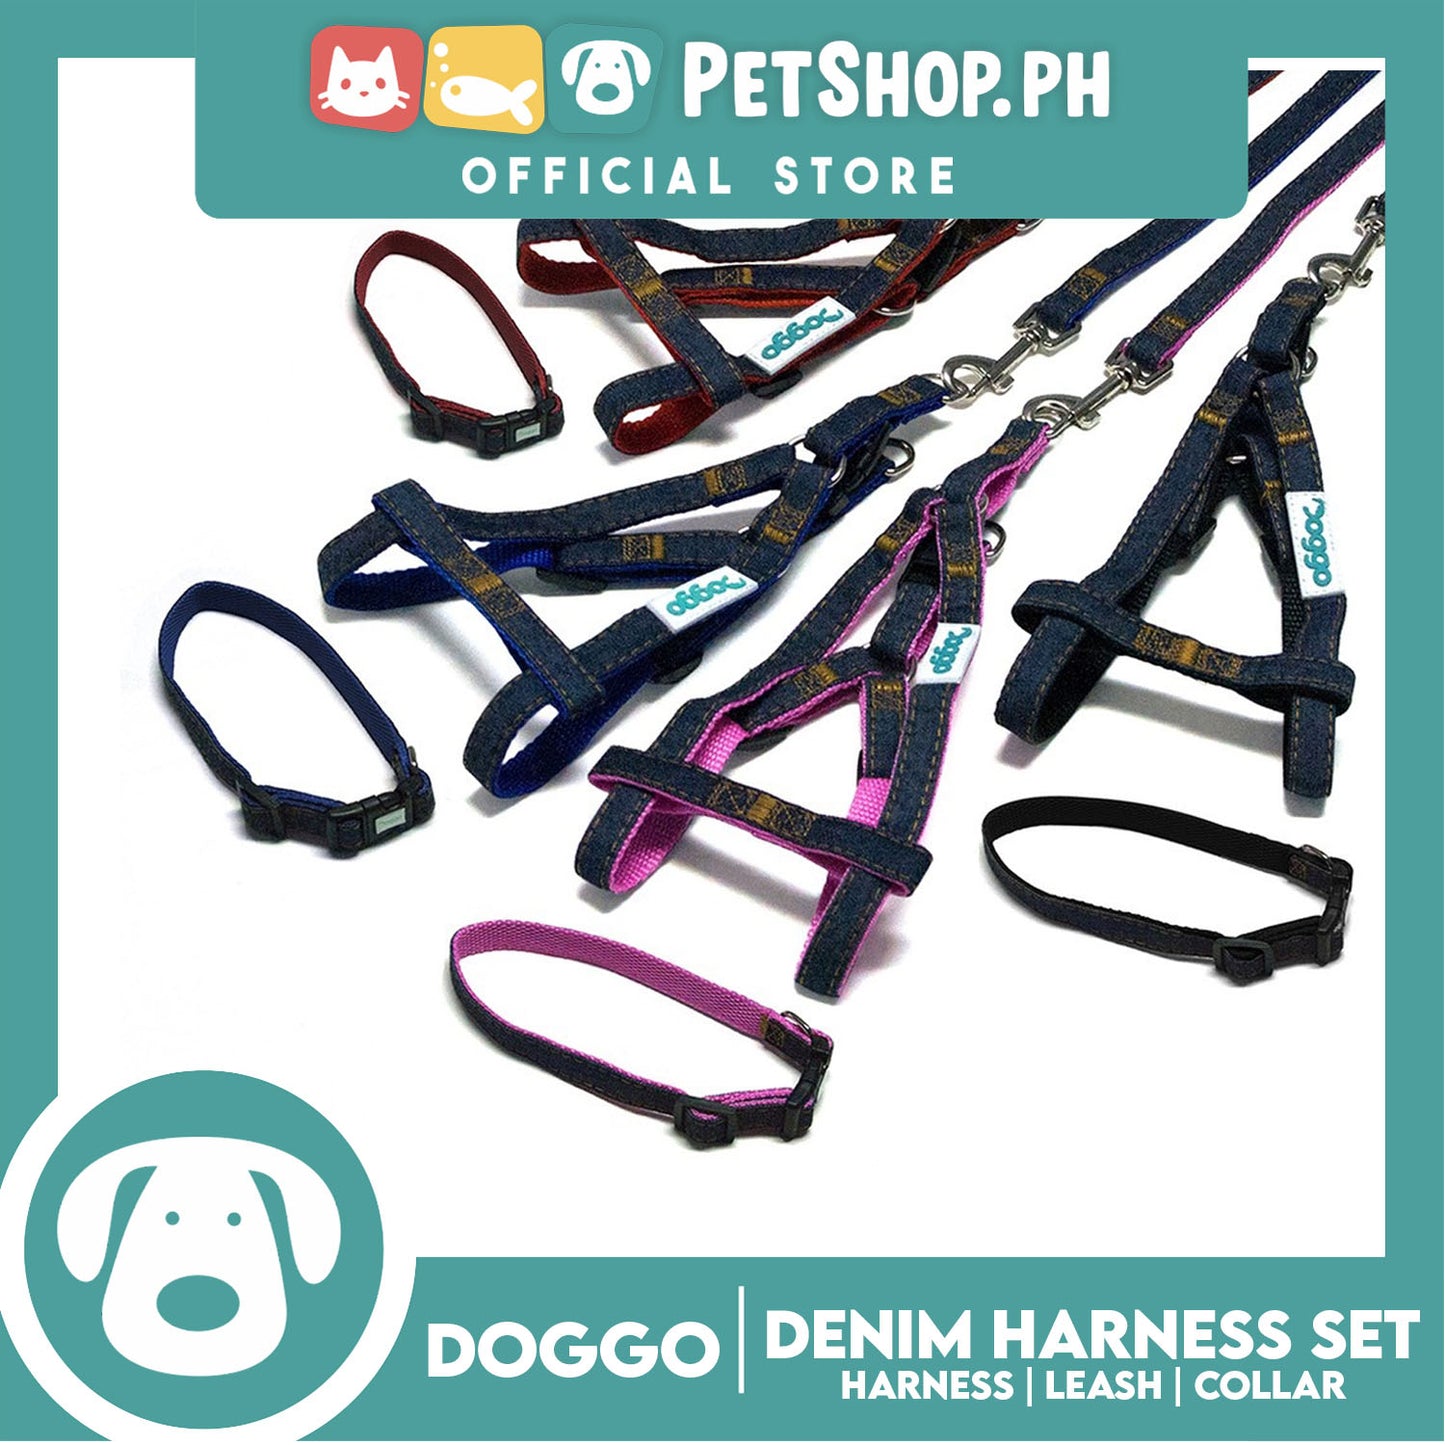 Doggo Strong Harness Set Denim Design Small (Pink) Harness, Leash and Collar for Your Dog